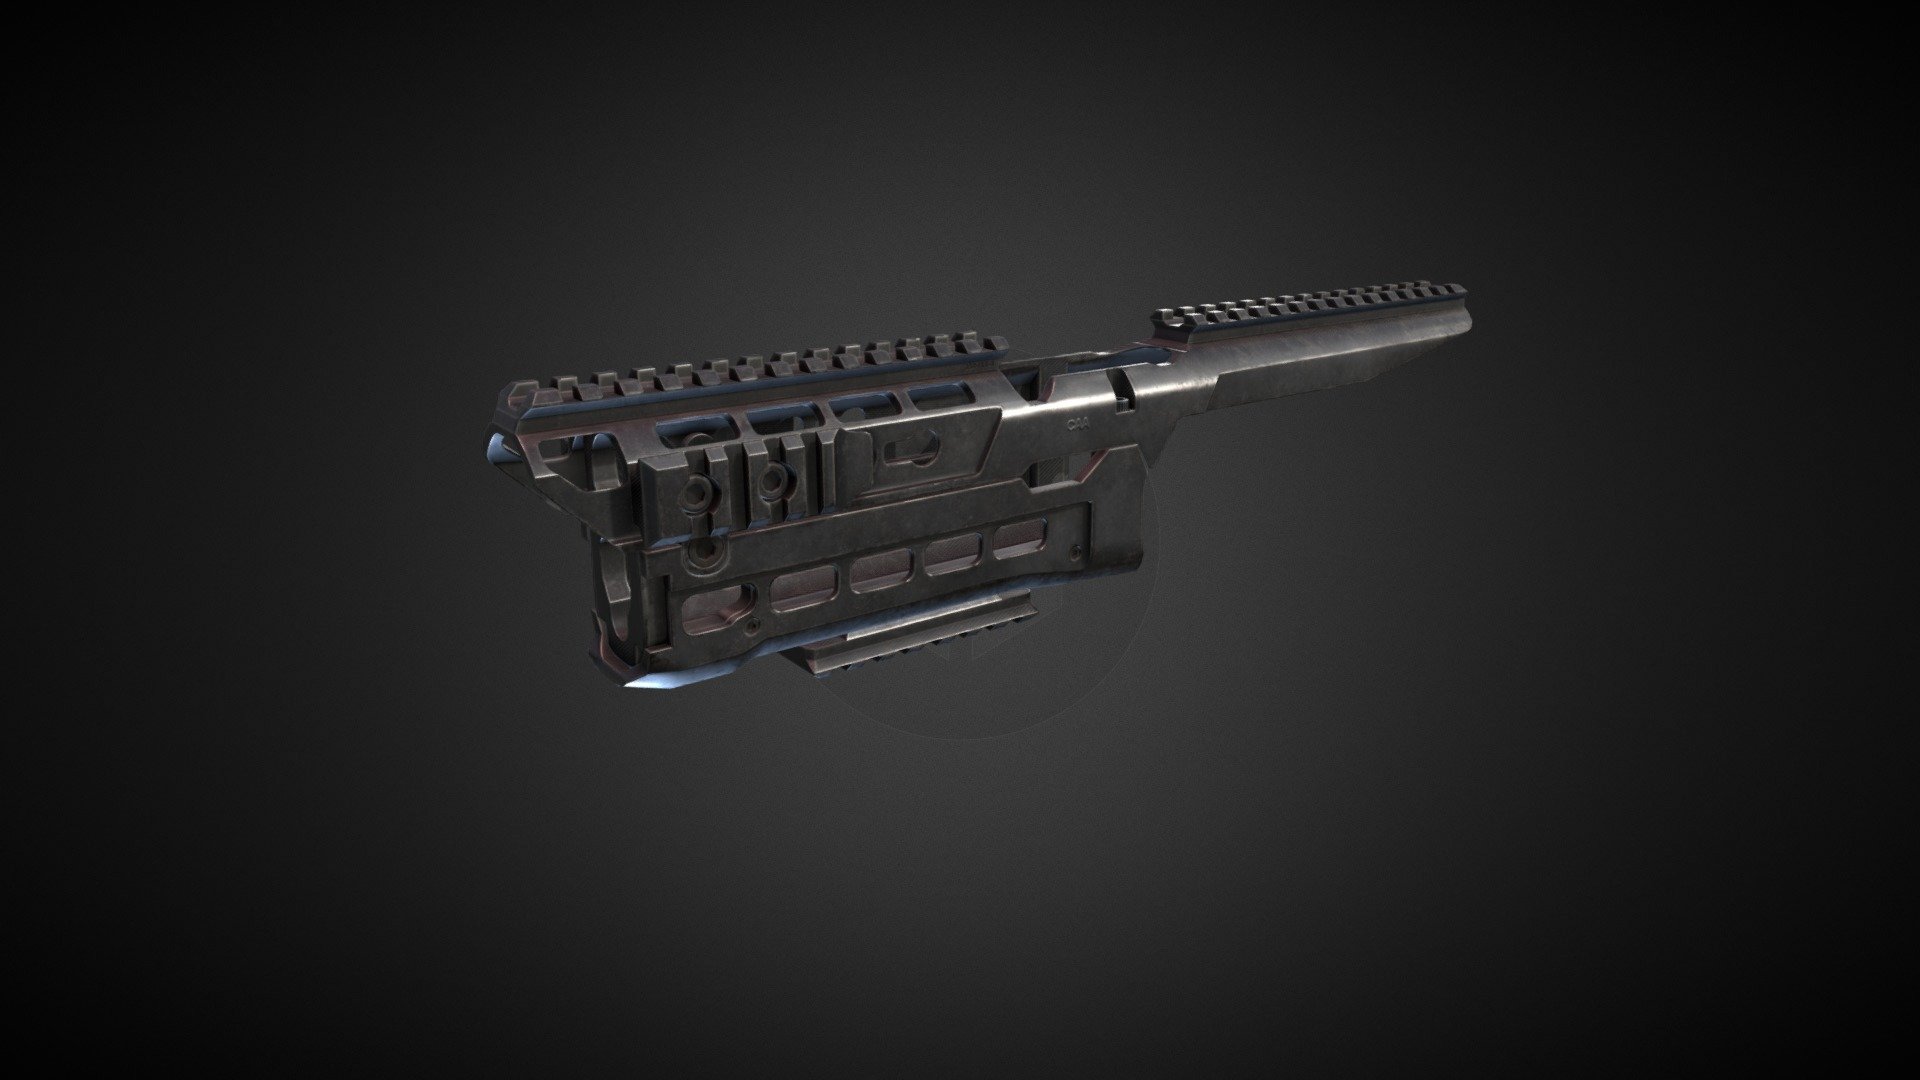 Handguards for AK 74/47/1xx series rifles with picatiny rails and mounting points on both sides.  

Model have one PBR material in 4K, black, FDE and grey metalic colors available.

Tris: 9K

Verts: 5K  

Made in Blender.  

PS. I tested it on few AK models from popular games, they fit. Some had weirdly big sight post, so handguard needed small correction, but it was nothing major, If your AK will also have similar problem let me know I will try modify model to fit.  

PS2 Model is not made to be 3D printable so please dont ask for conversion or scaling for it 3d model